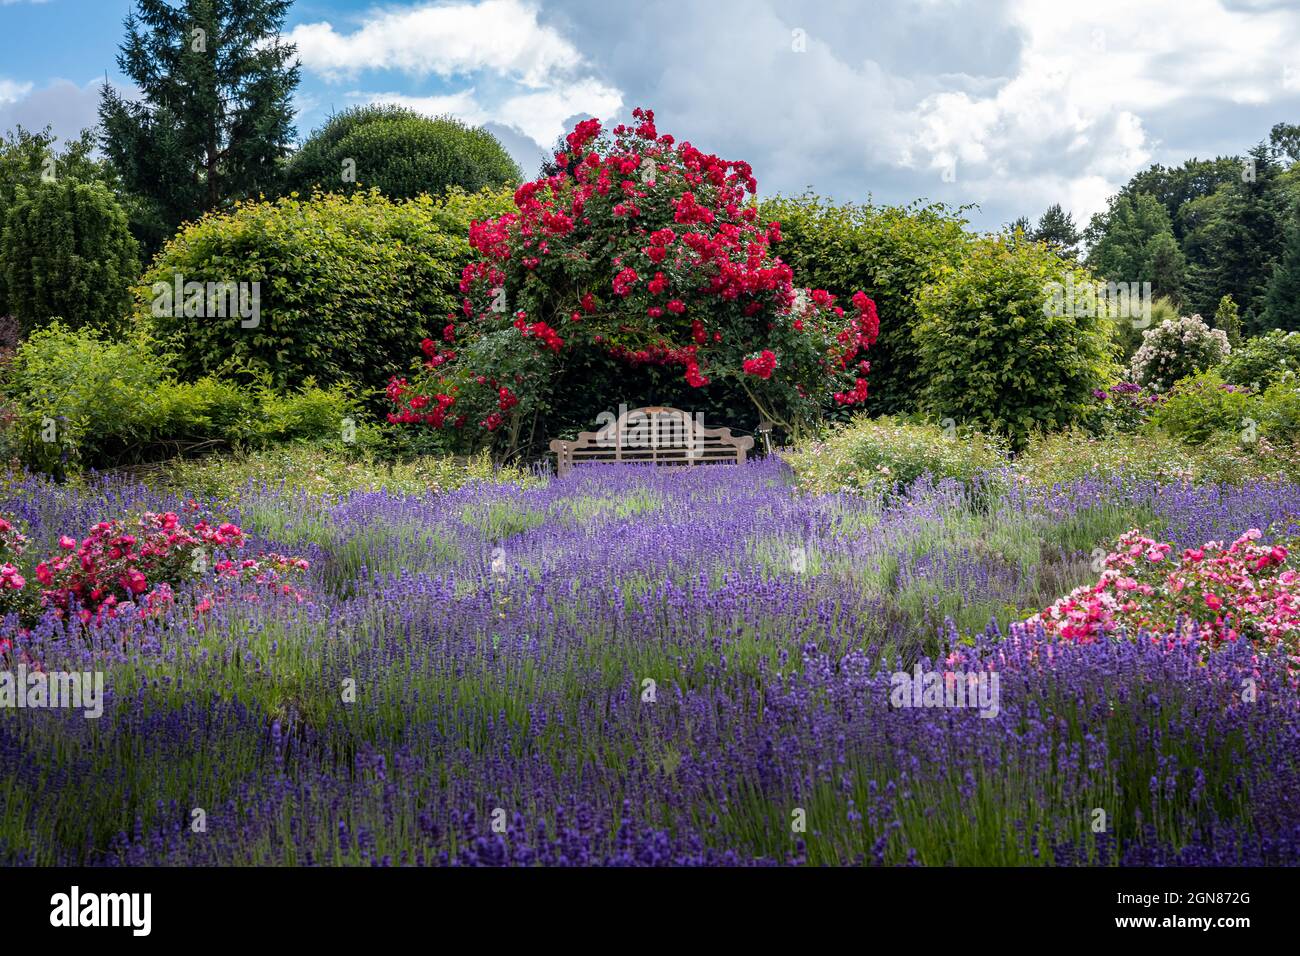 WOJSLAWICE, POLAND - July 9, 2021: A wooden bench in the garden, surrounded by climbing roses, green trees and blooming lavender flowers. Stock Photo